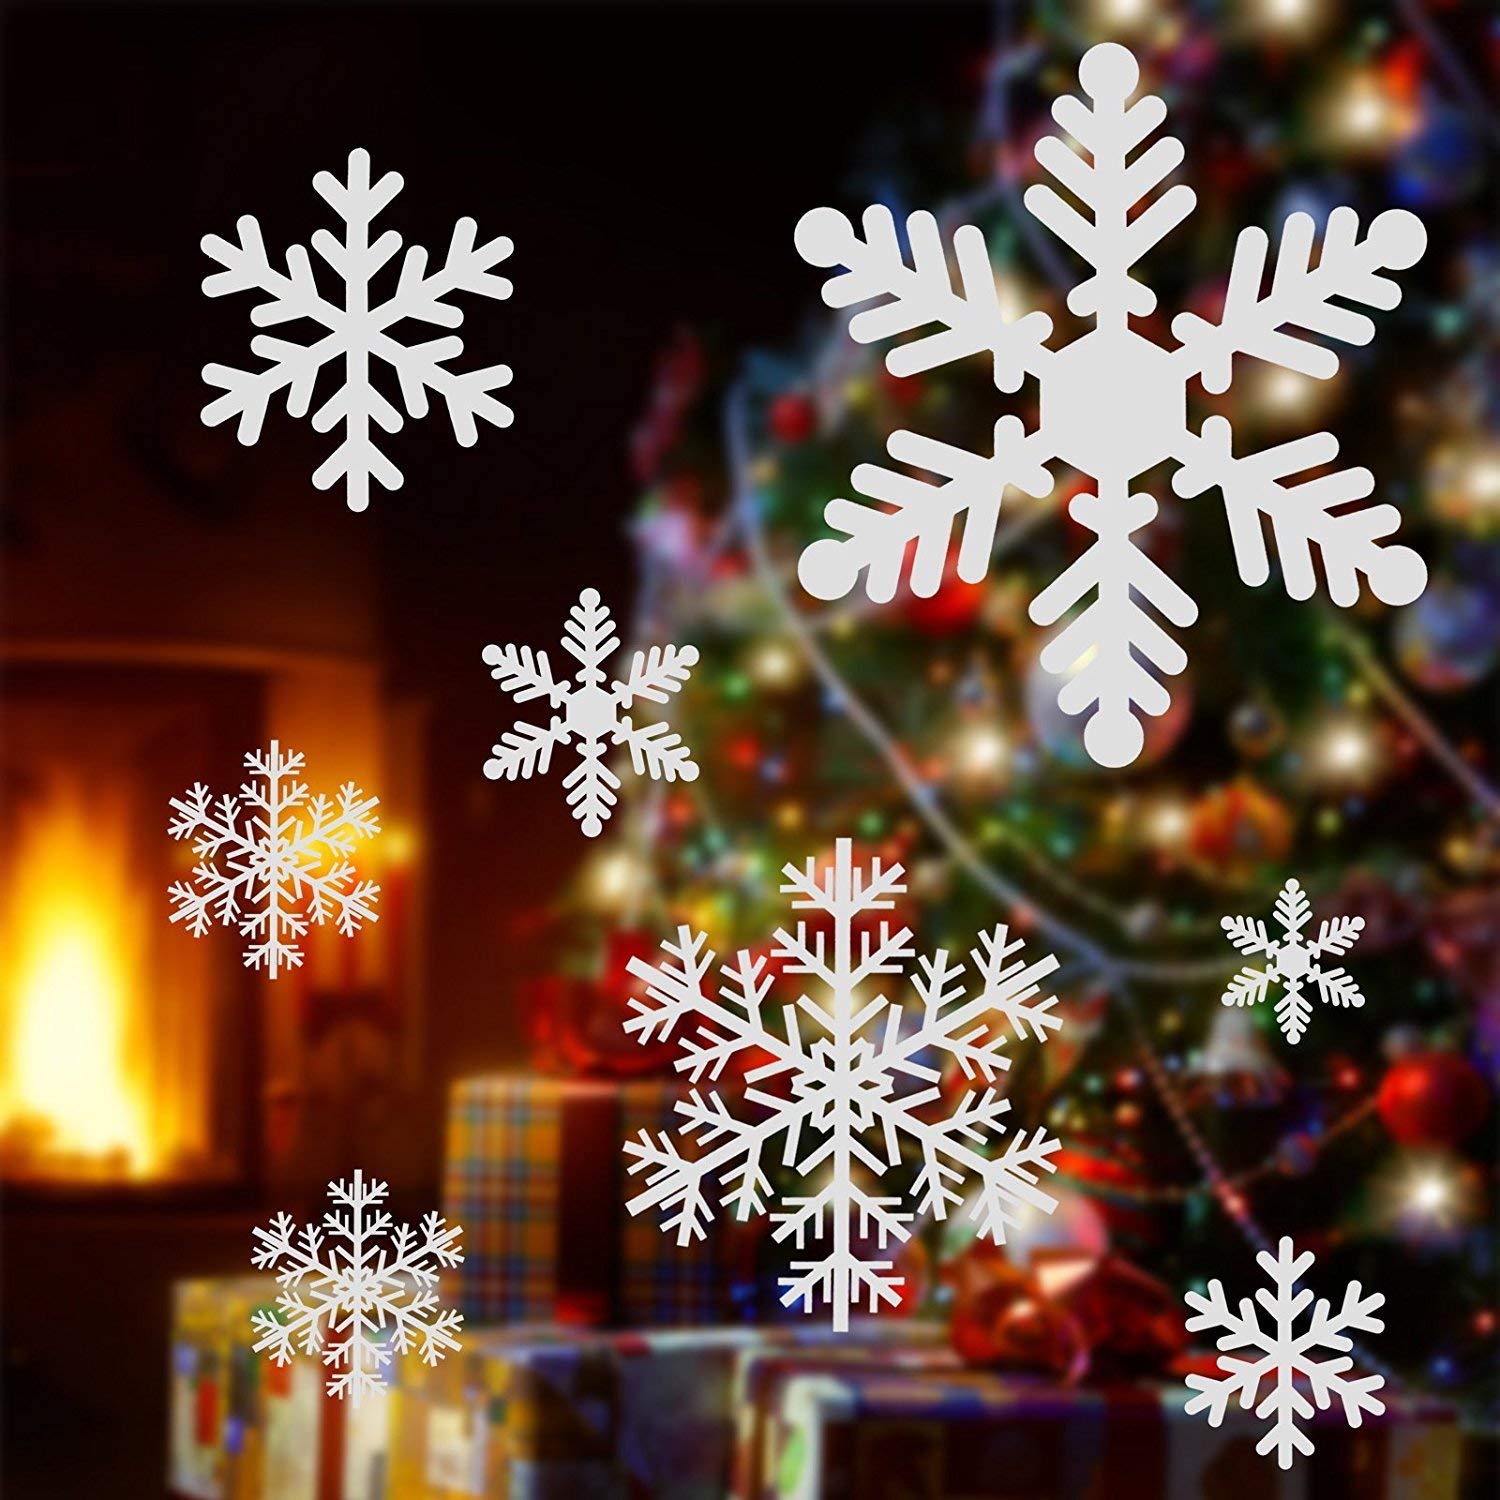 Christmas Snowflake Window Stickers Clings Decorations - White Christmas Window Decals for Kids Winter Decorations